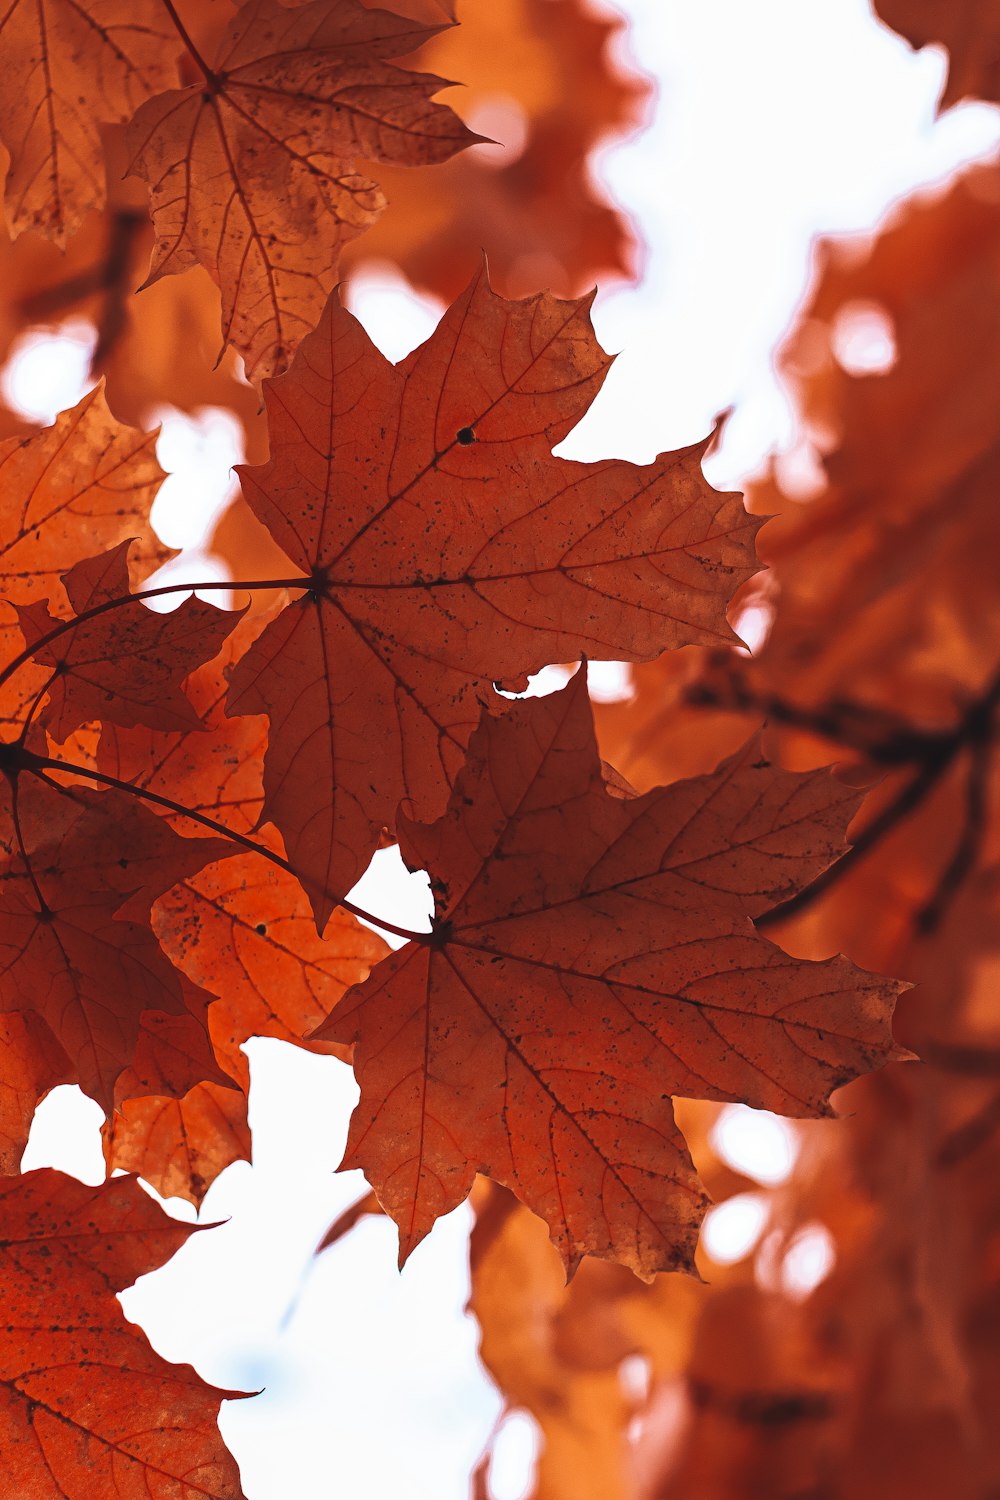 brown maple leaf in close up photography